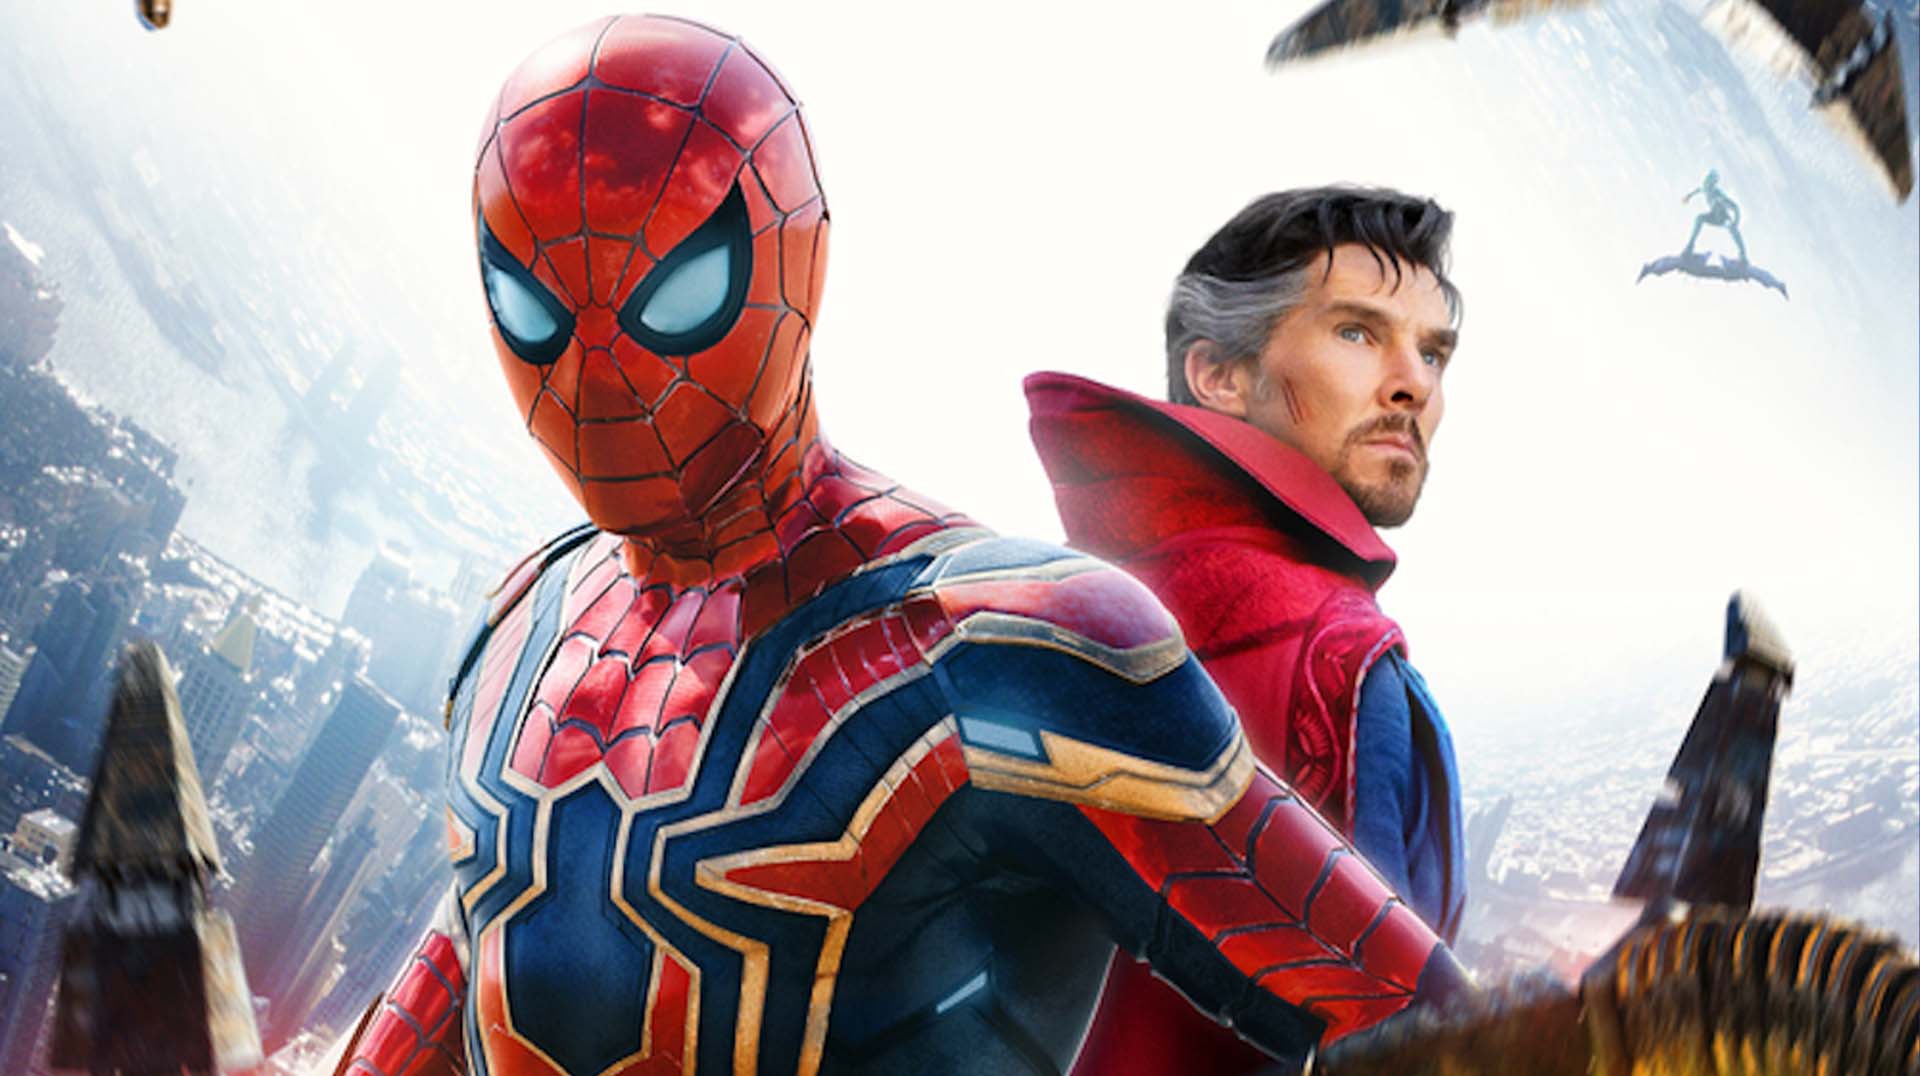 Spider-Man 4's villain might have leaked and fans are going to love it